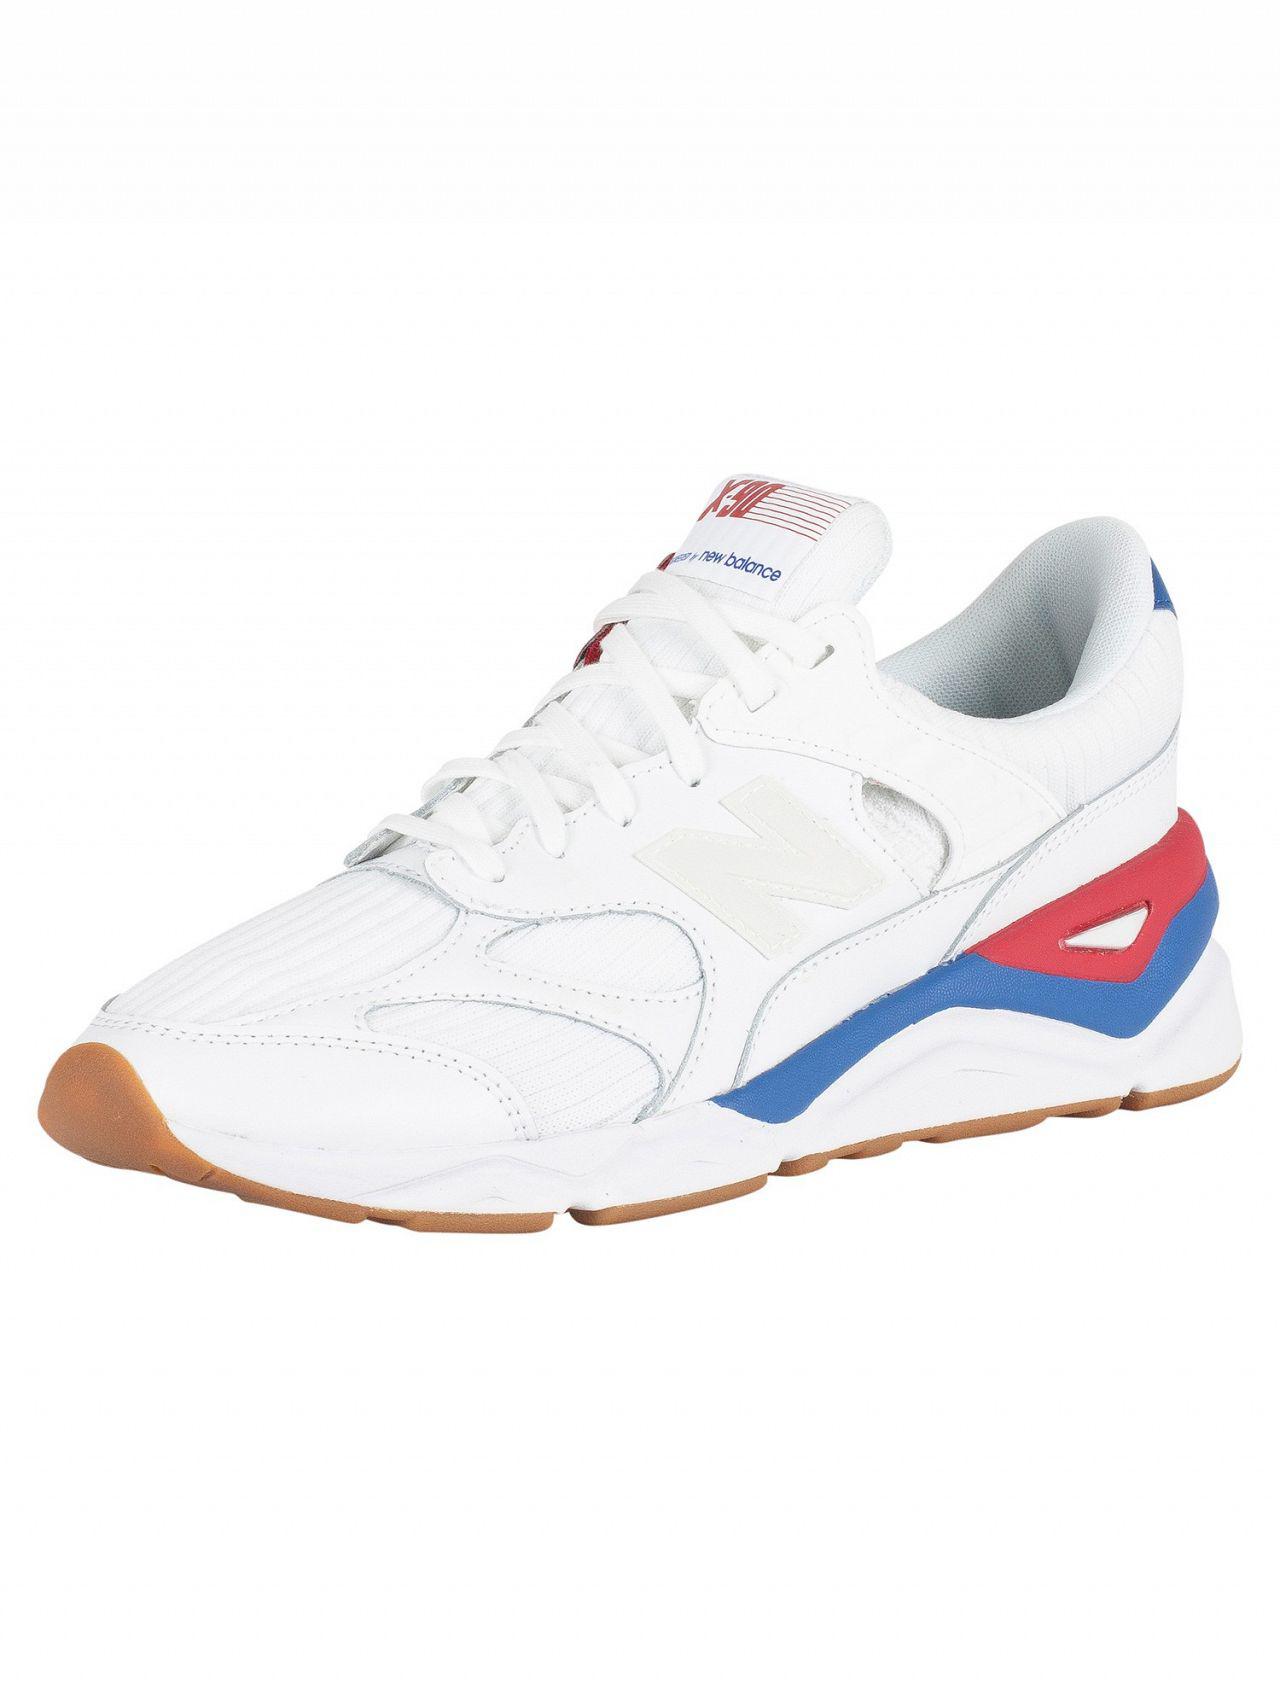 New Balance Suede White/blue/red X-90 Trainers for Men - Lyst